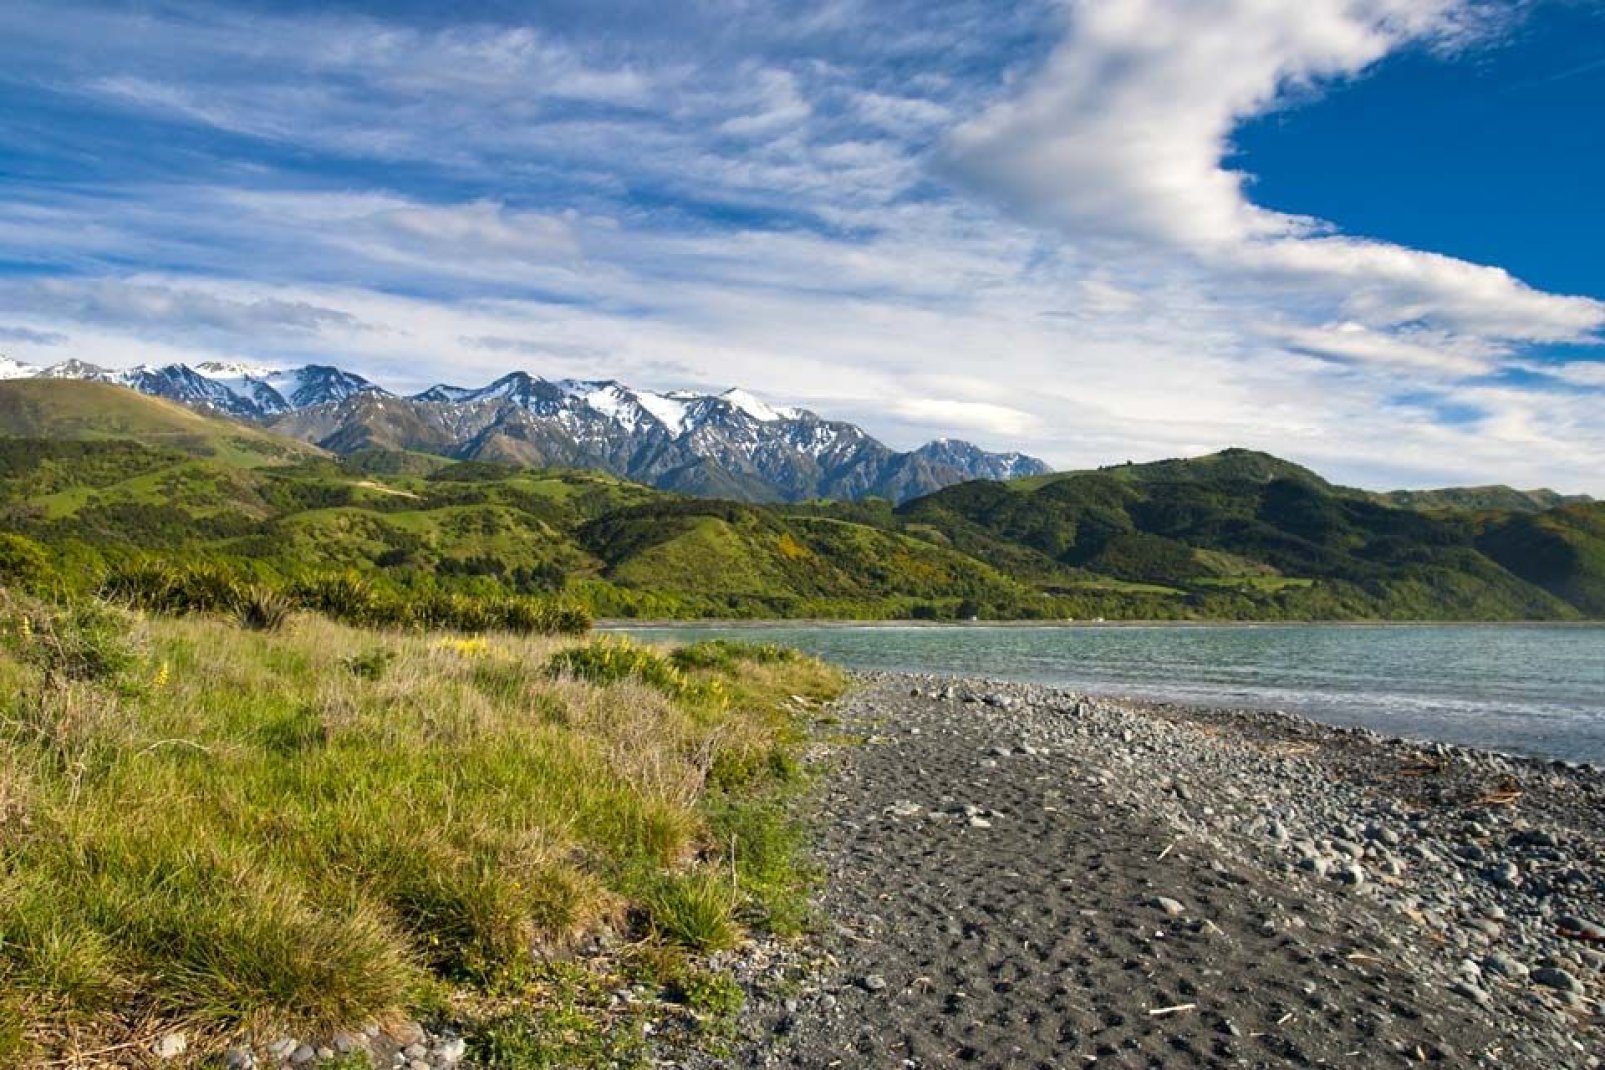 Kaikoura is a village located in New Zealand's South Island where you can go on some beautiful walks along the coastal trails.